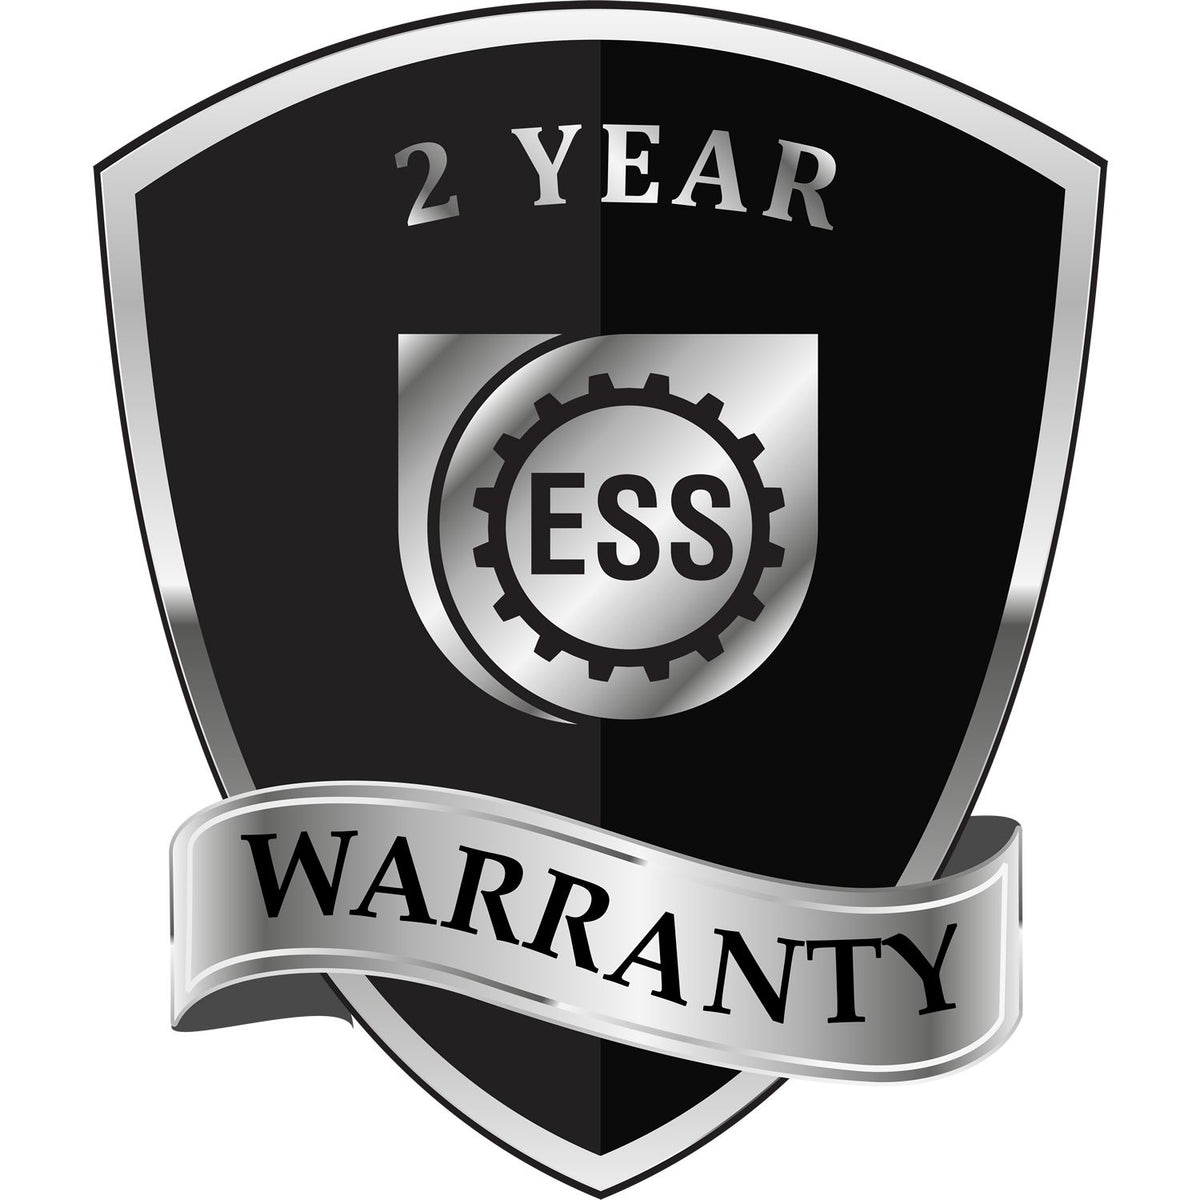 A black and silver badge or emblem showing warranty information for the Hybrid Montana Engineer Seal